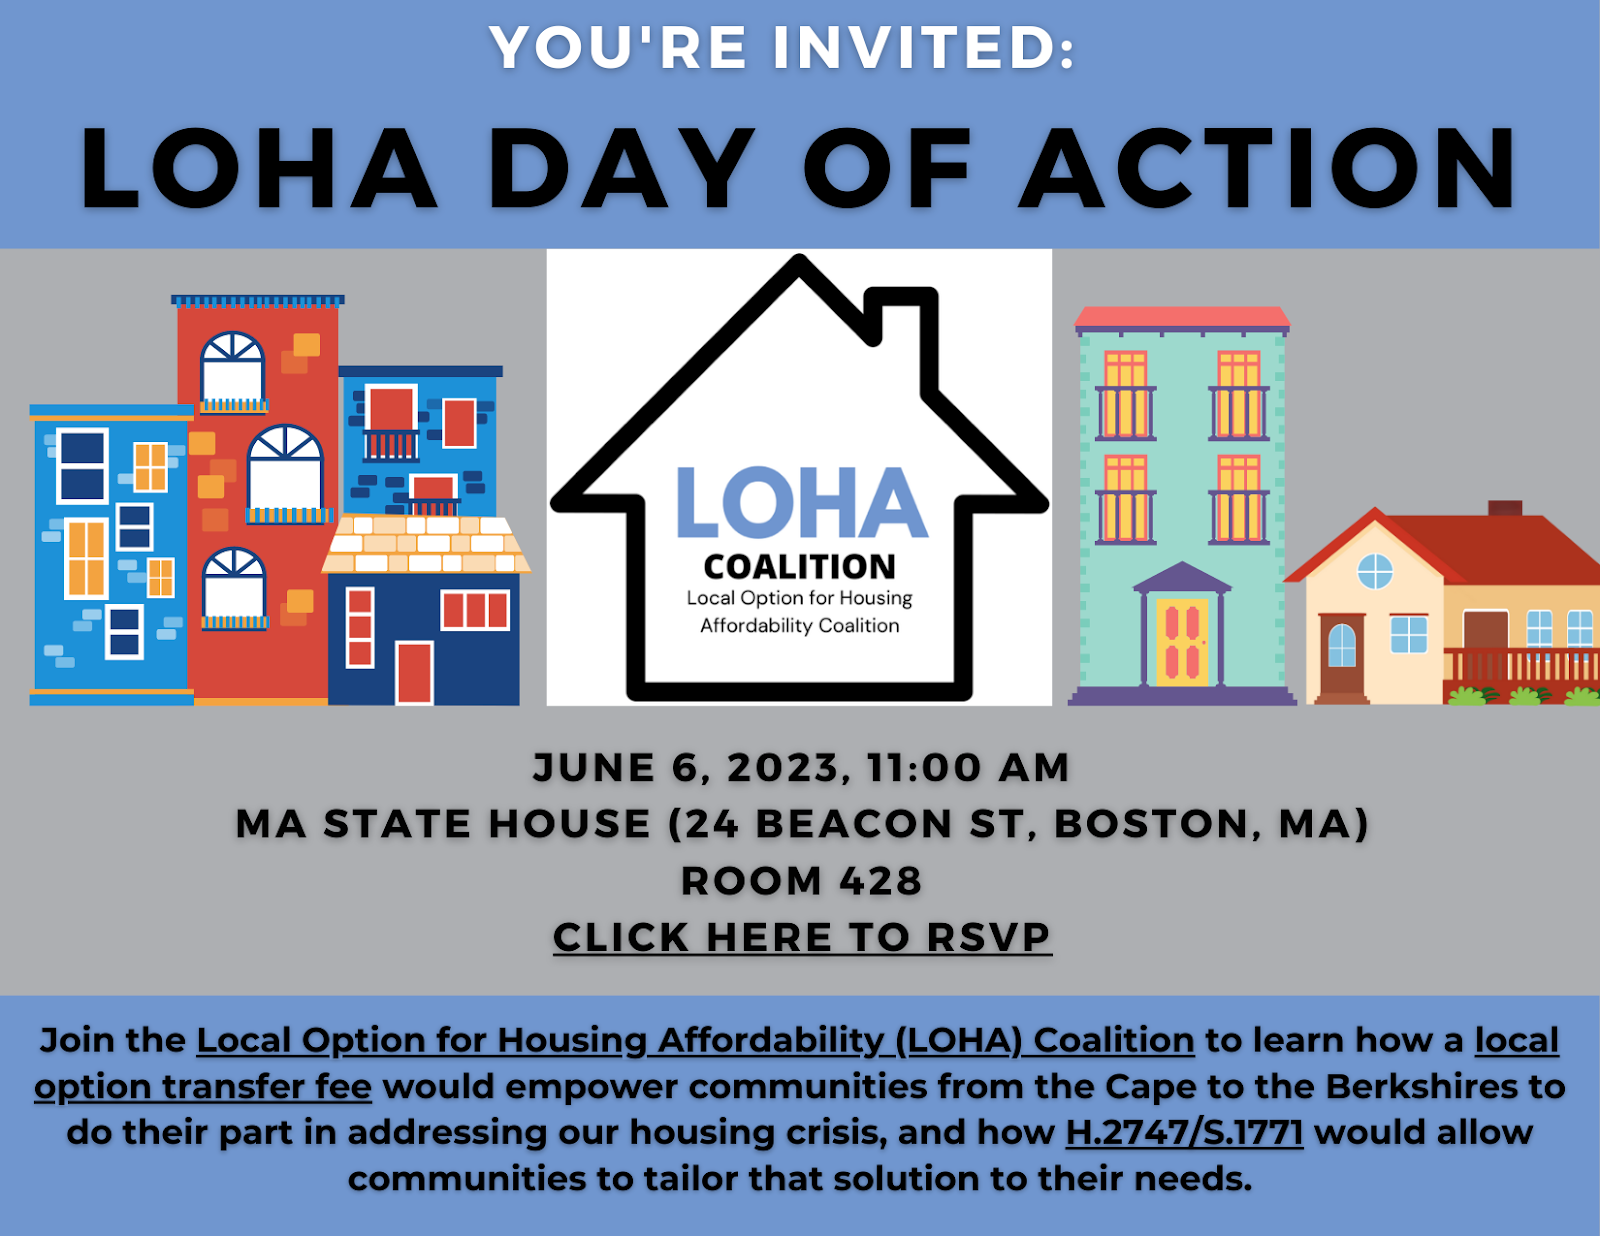 LOHA Day of Action